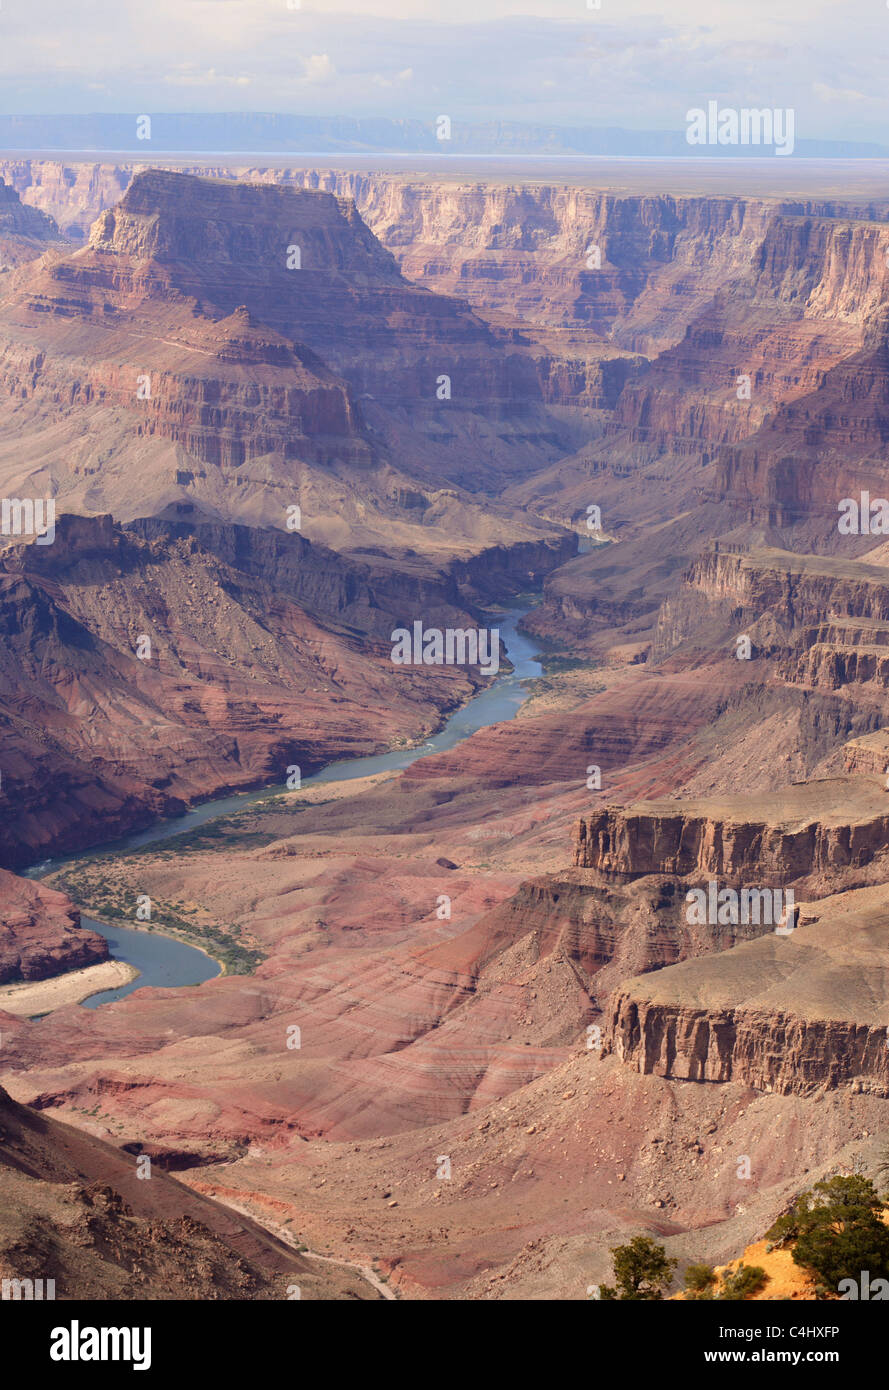 Grand Canyon Colorado River view from Desert Point overlook Stock Photo